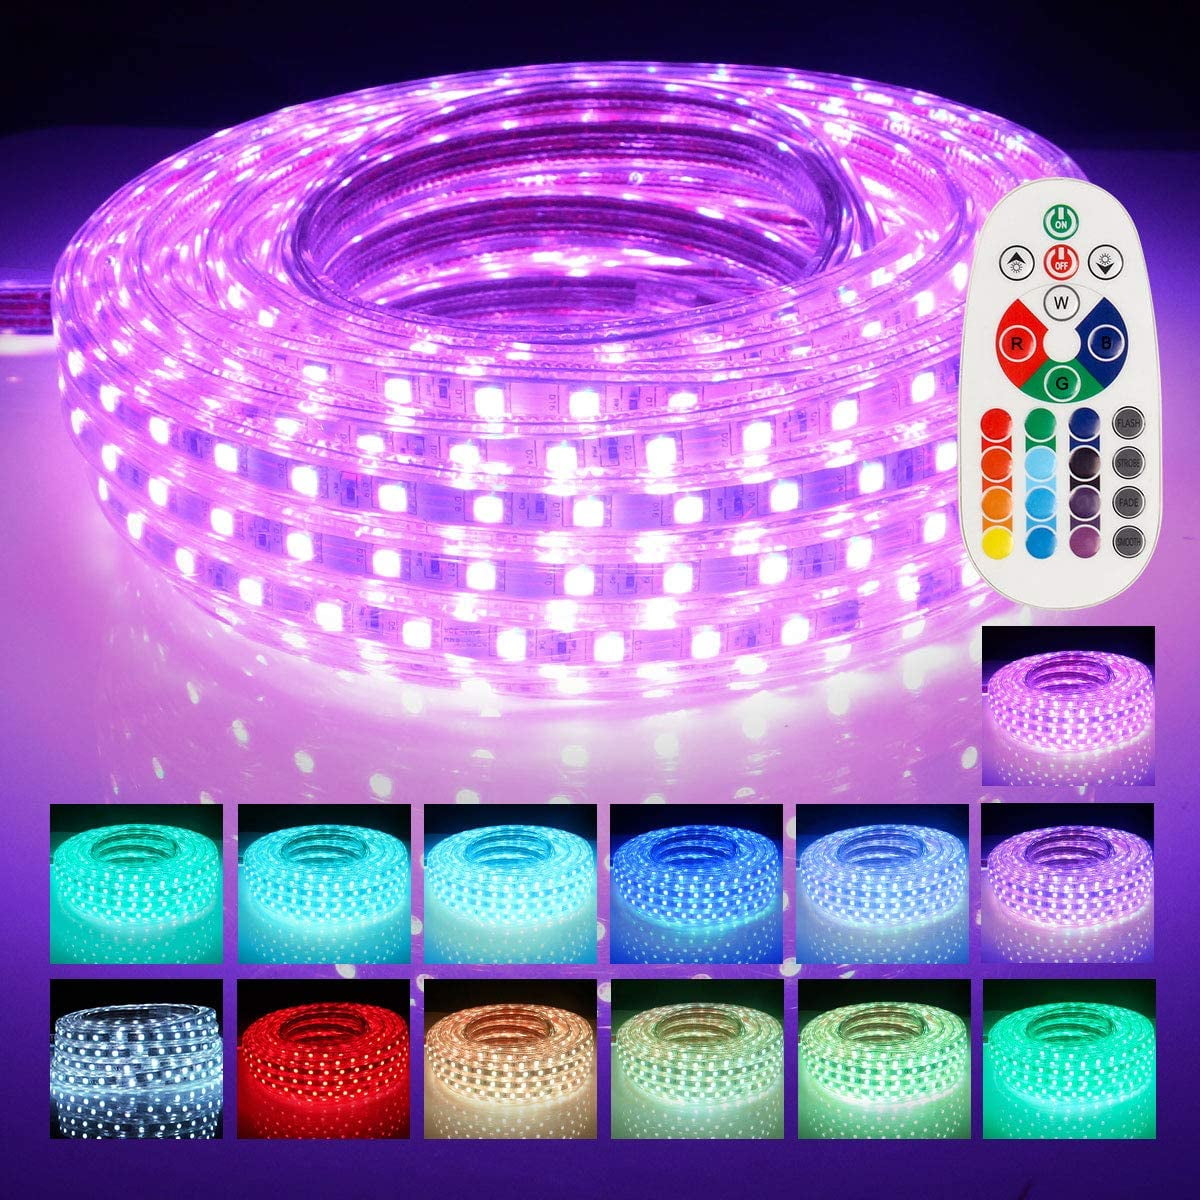 110V 5050 LED Strip Light Flexible Tape Home Outdoor Lighting Rope With US Plug 